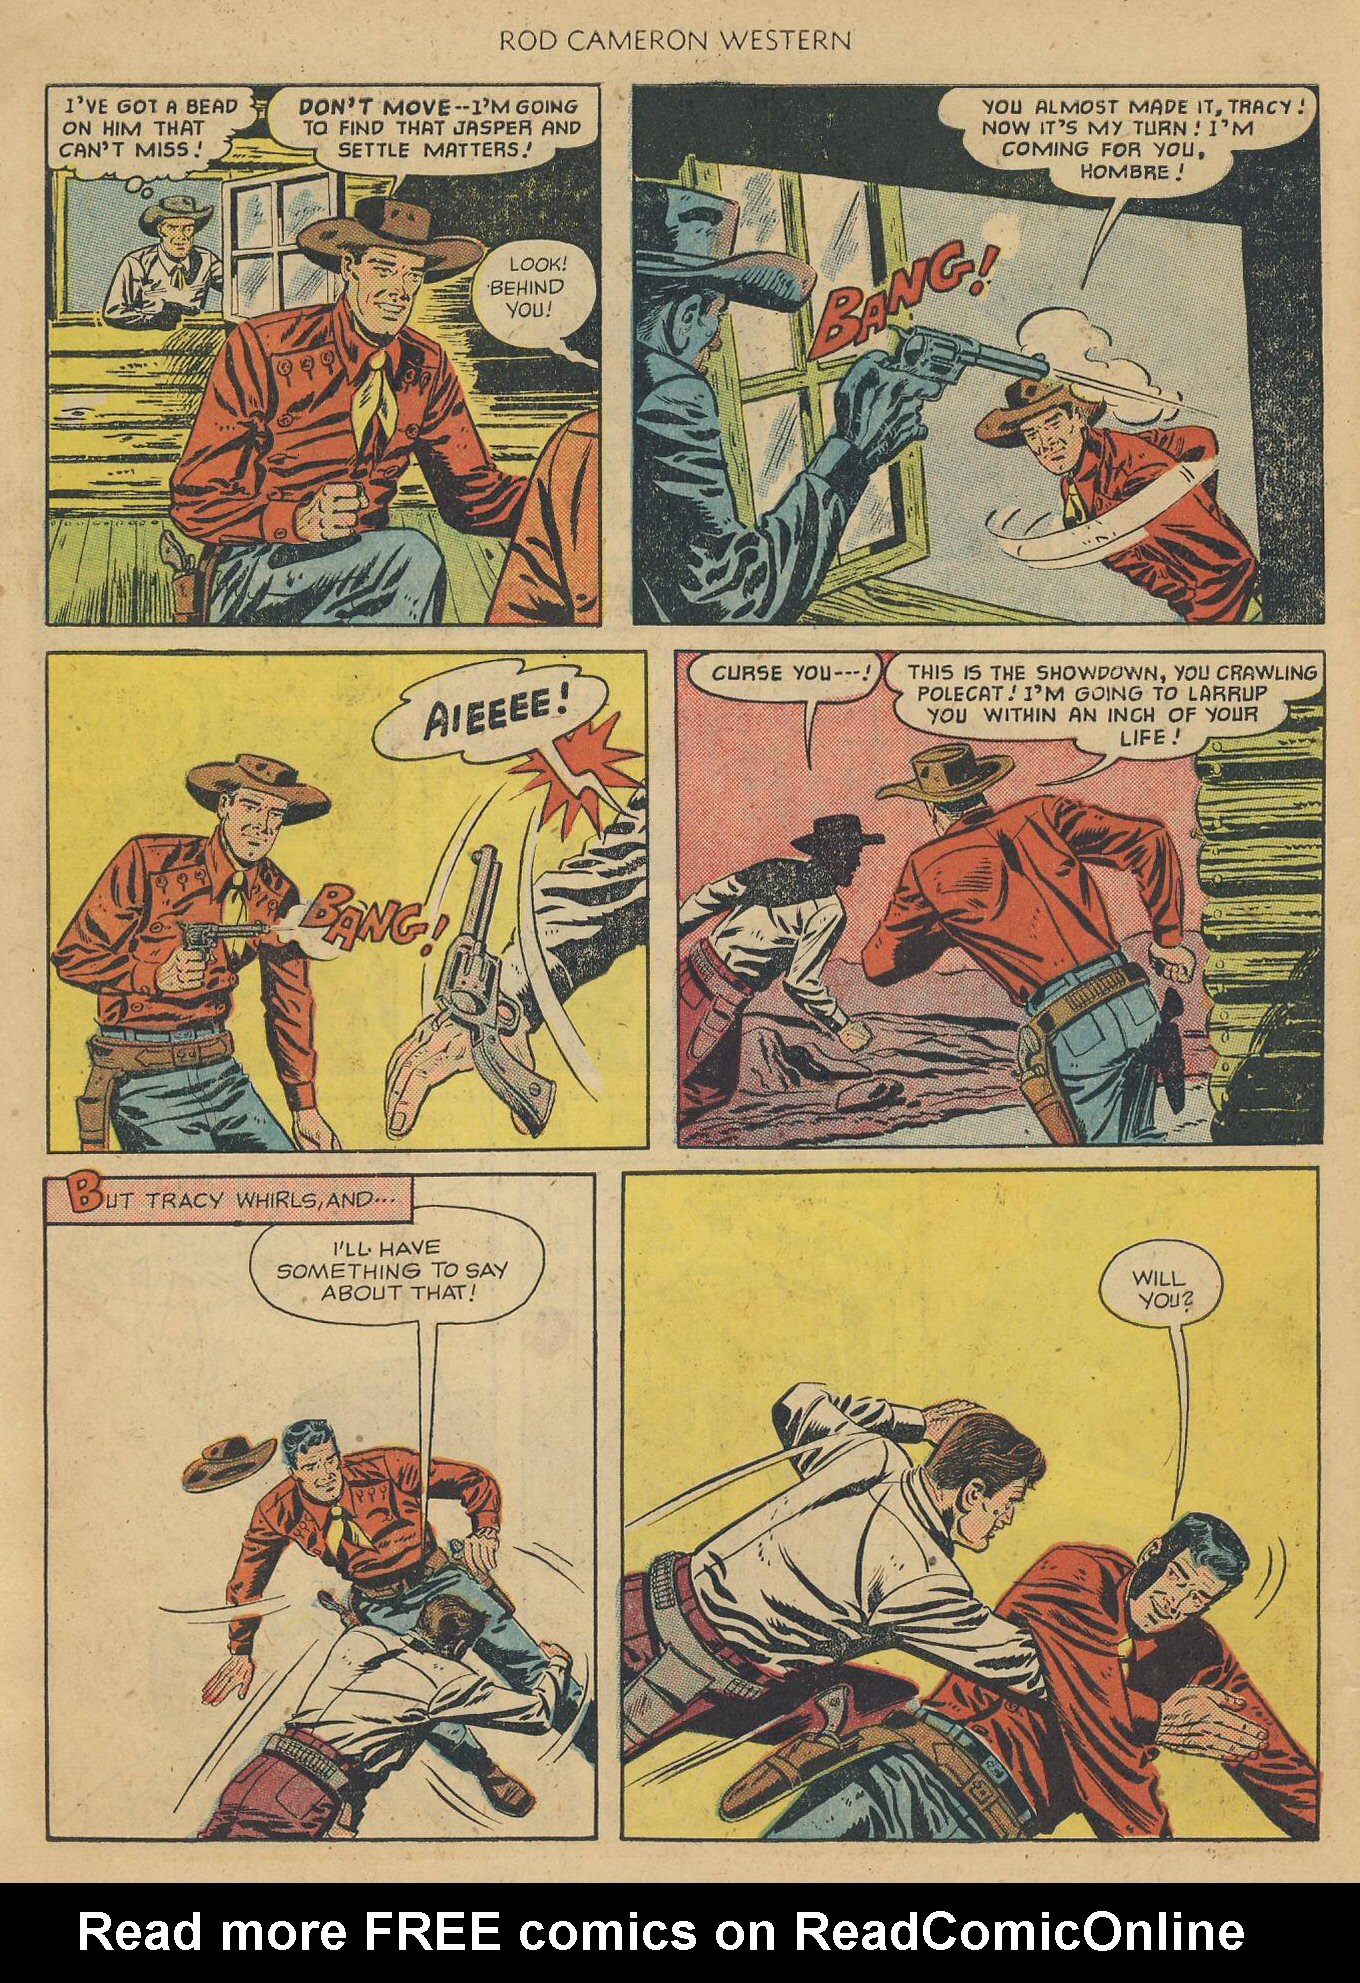 Read online Rod Cameron Western comic -  Issue #11 - 10